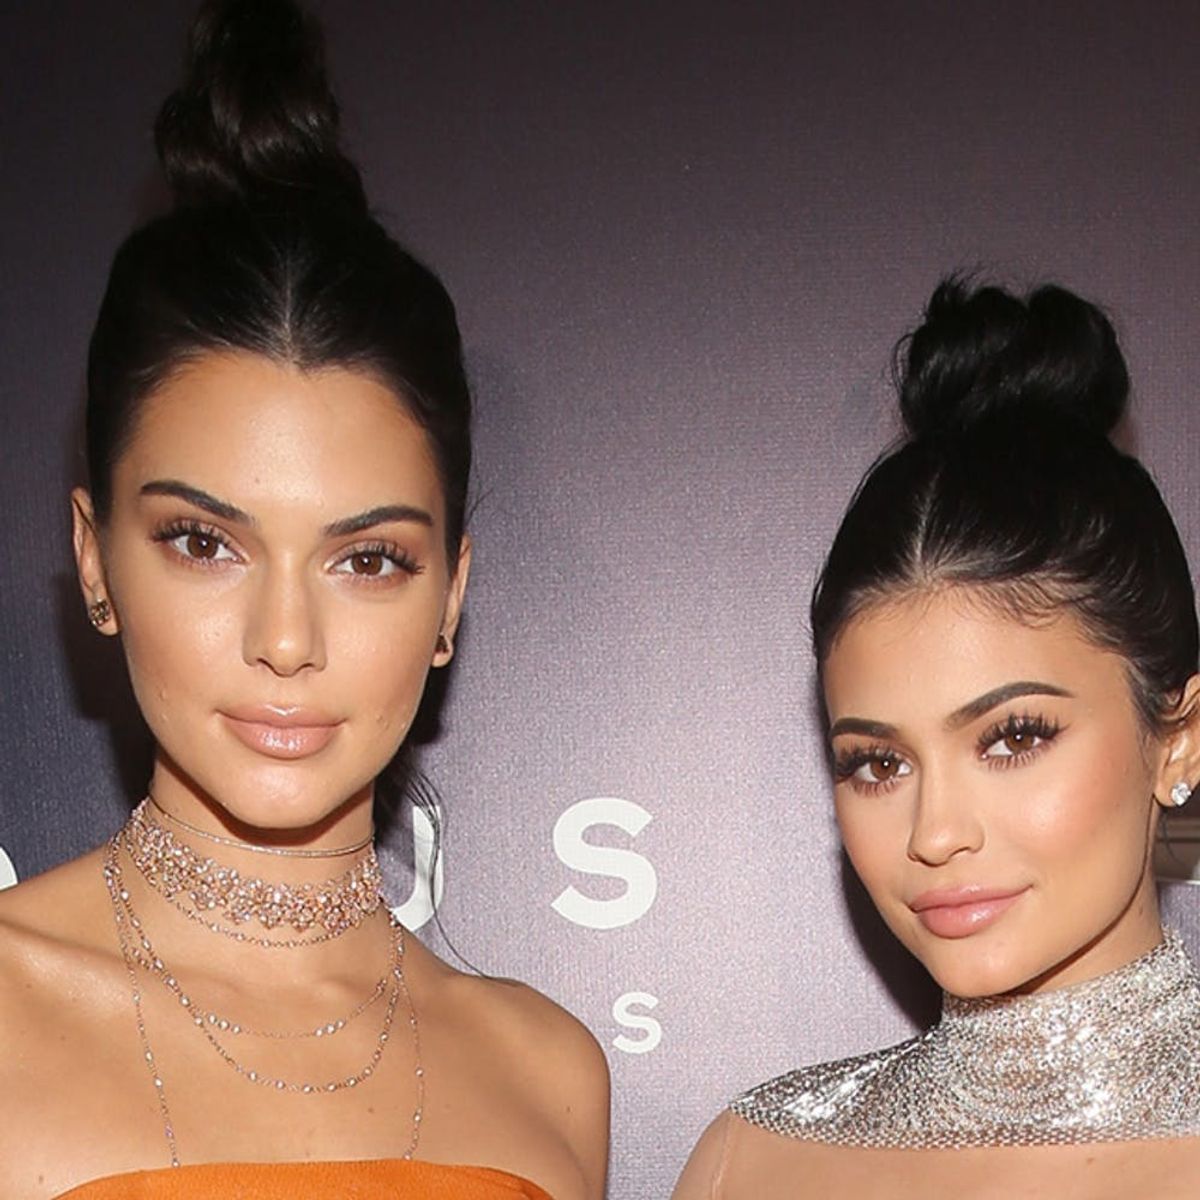 Kylie Jenner Revealed a Surprising Detail About Her Relationship With Kendall